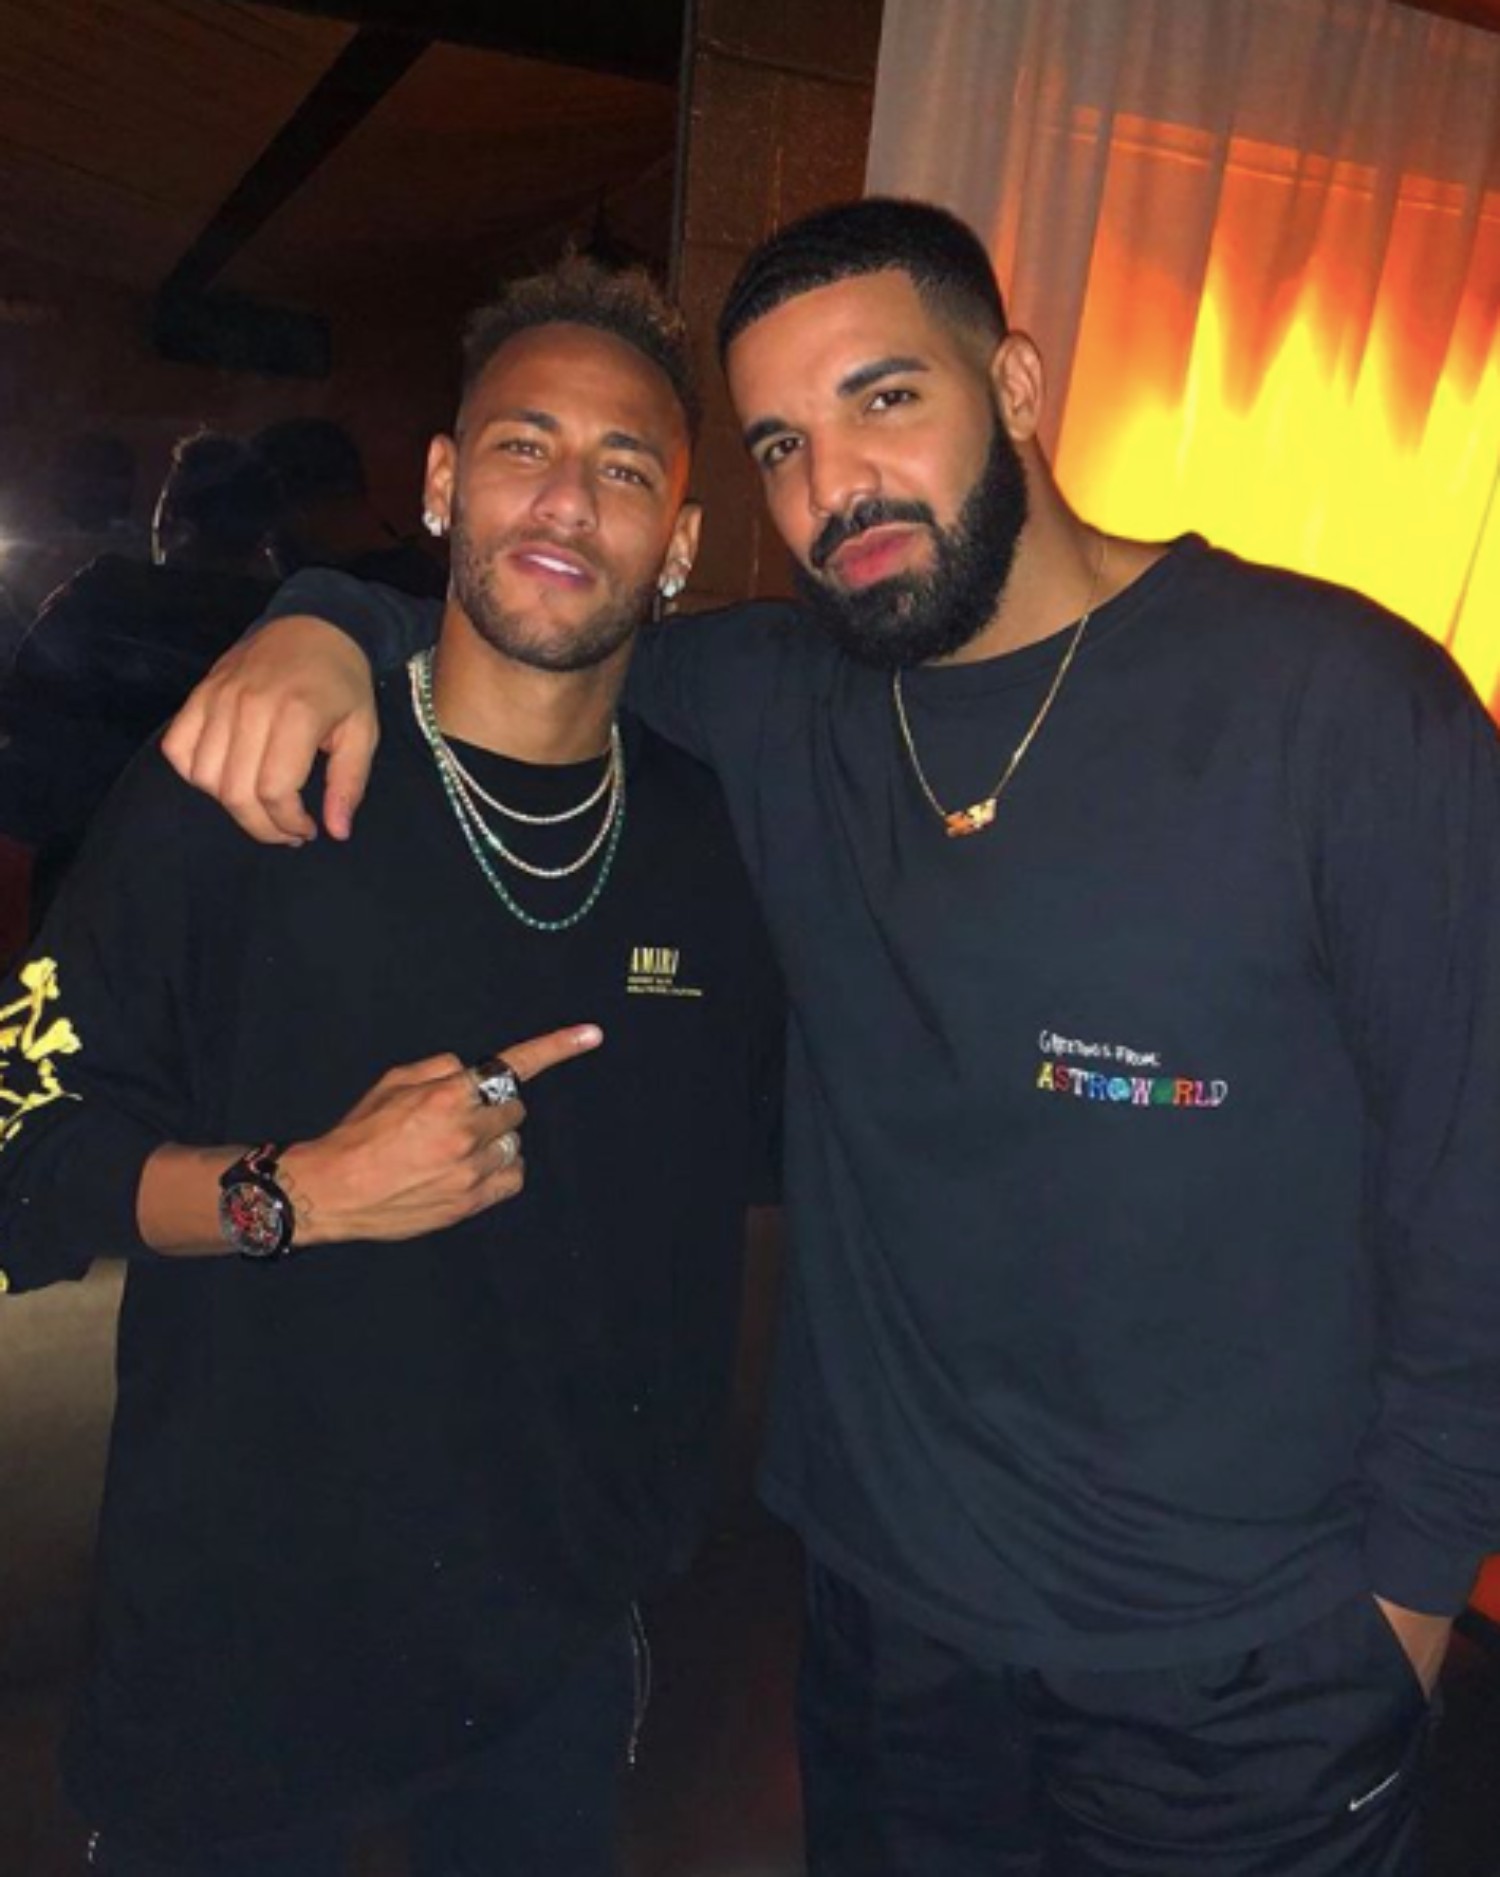 SPOTTED: Drake Wears Astroworld Merch in NYC with Neymar Jr